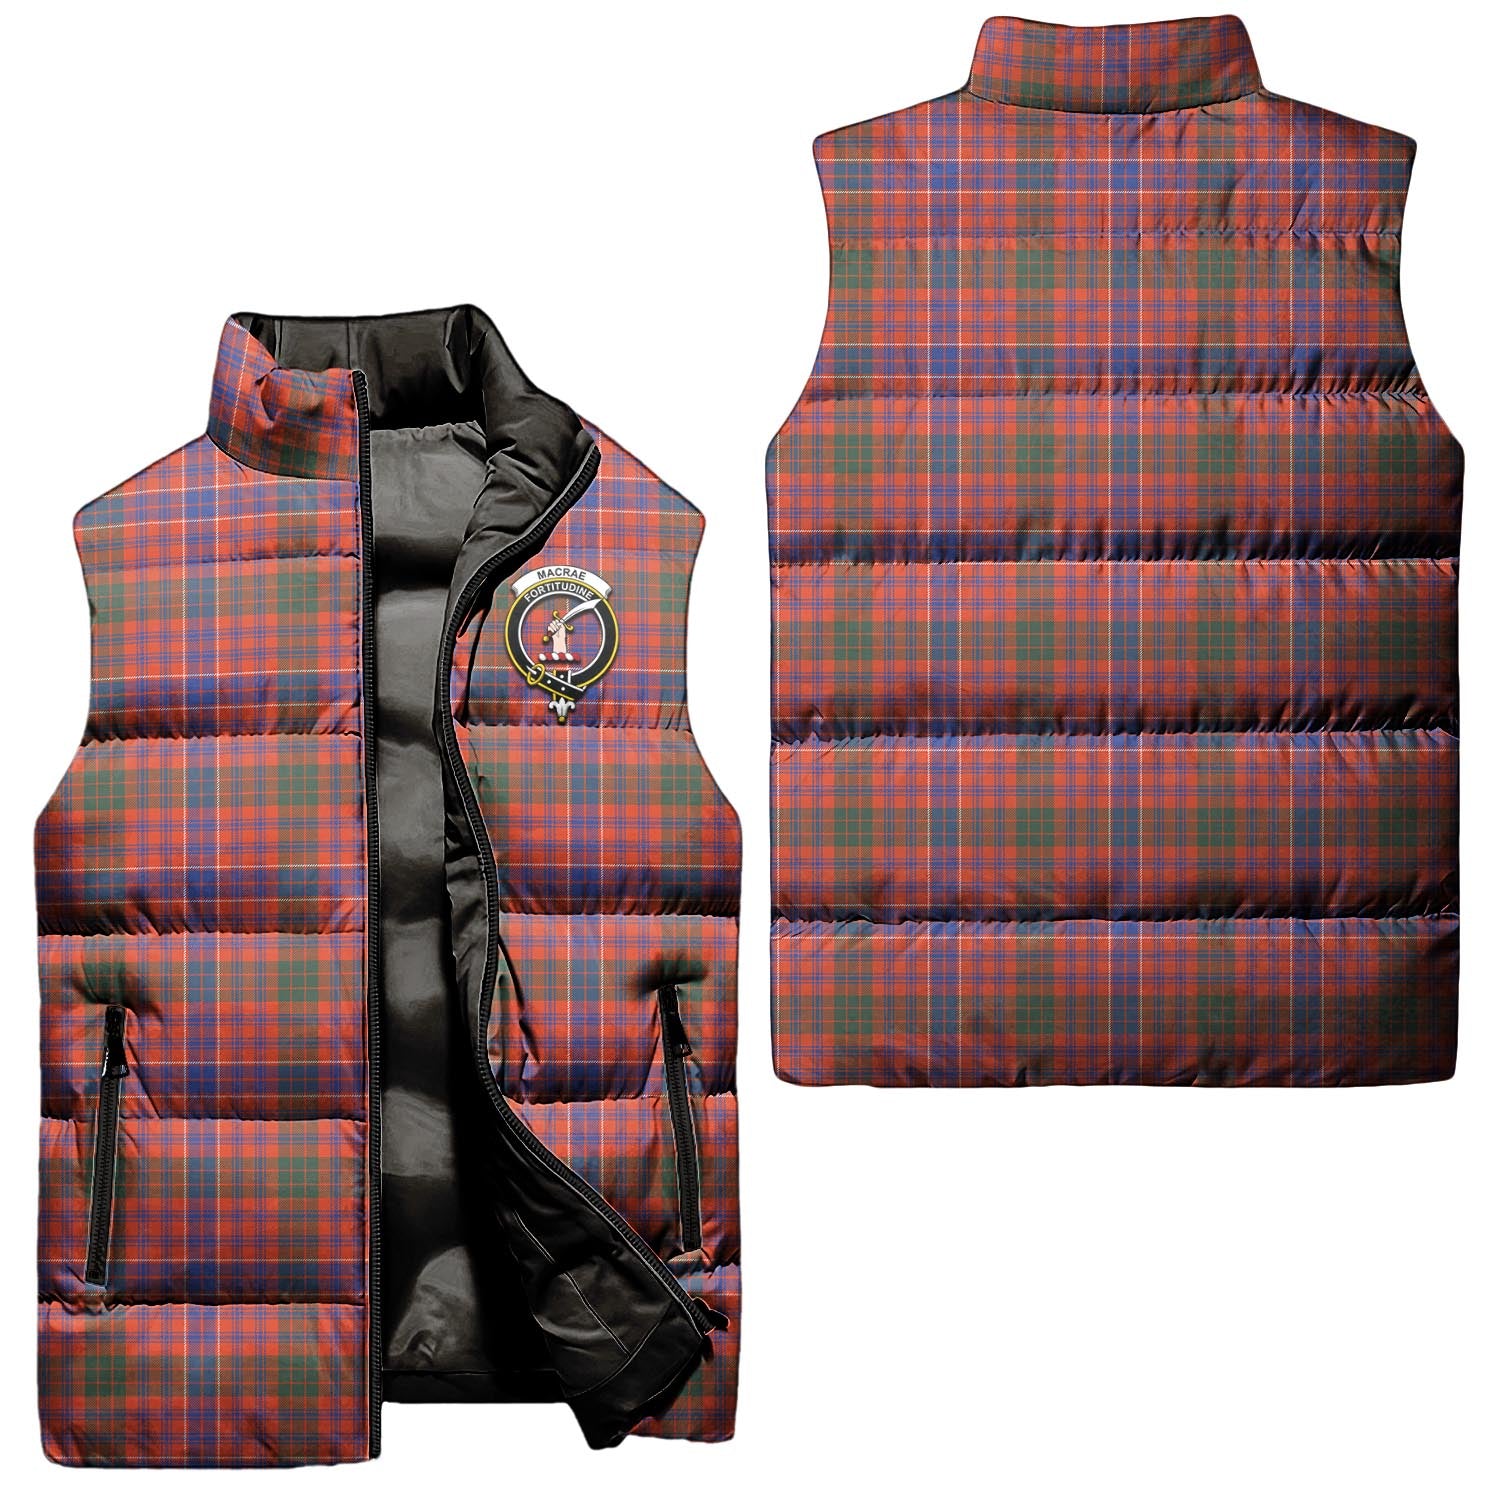 macrae-ancient-clan-puffer-vest-family-crest-plaid-sleeveless-down-jacket